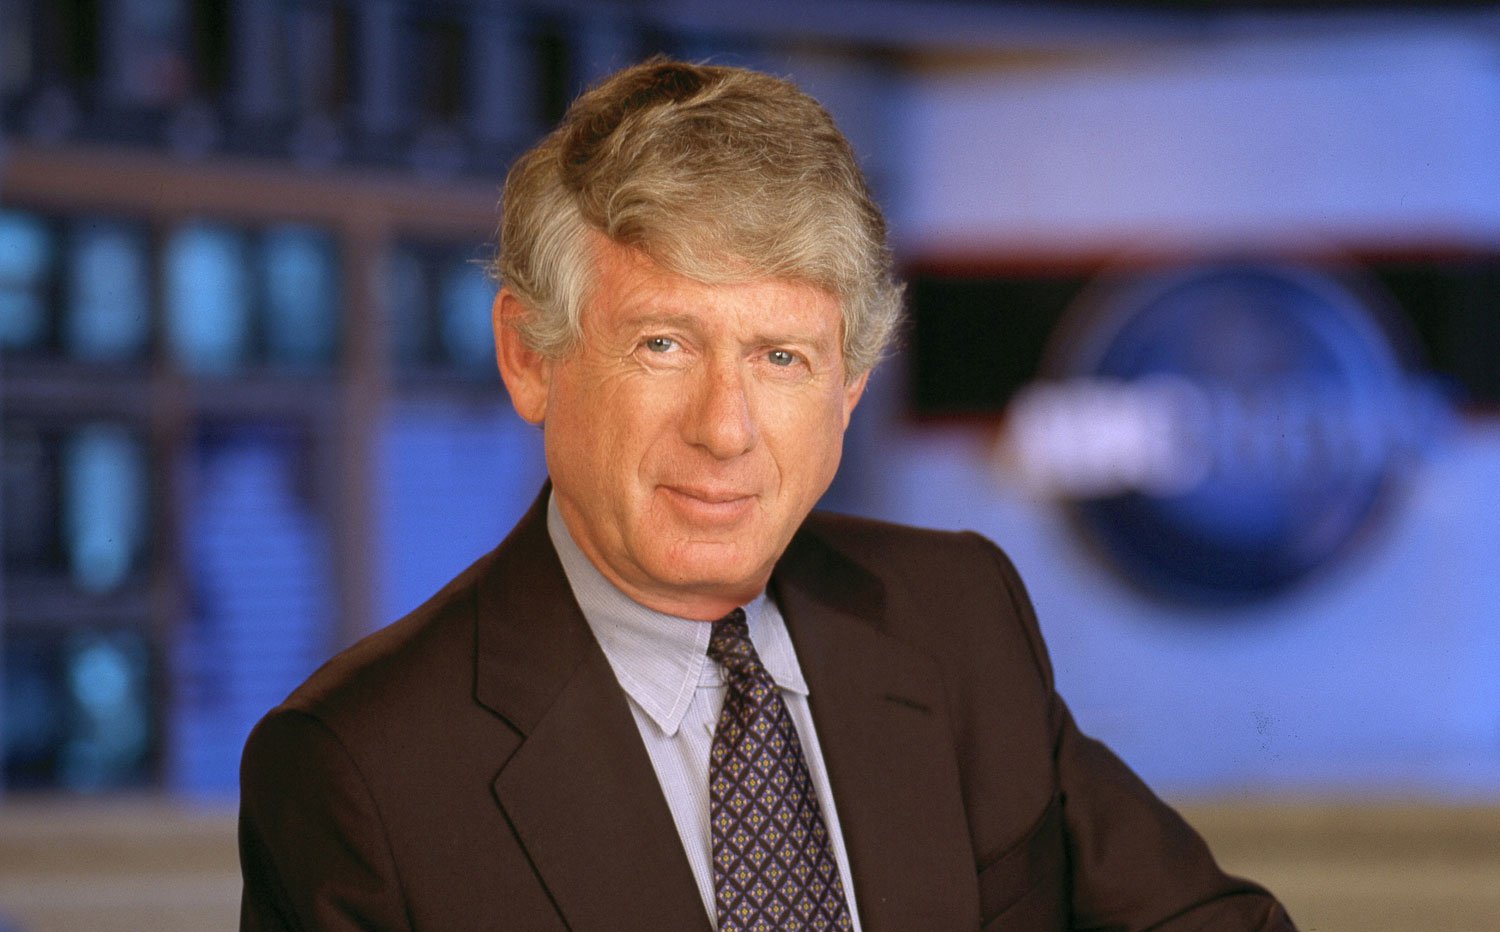 Ted Koppel: One of America's most experienced and well-known journalists. - What's Up? Media